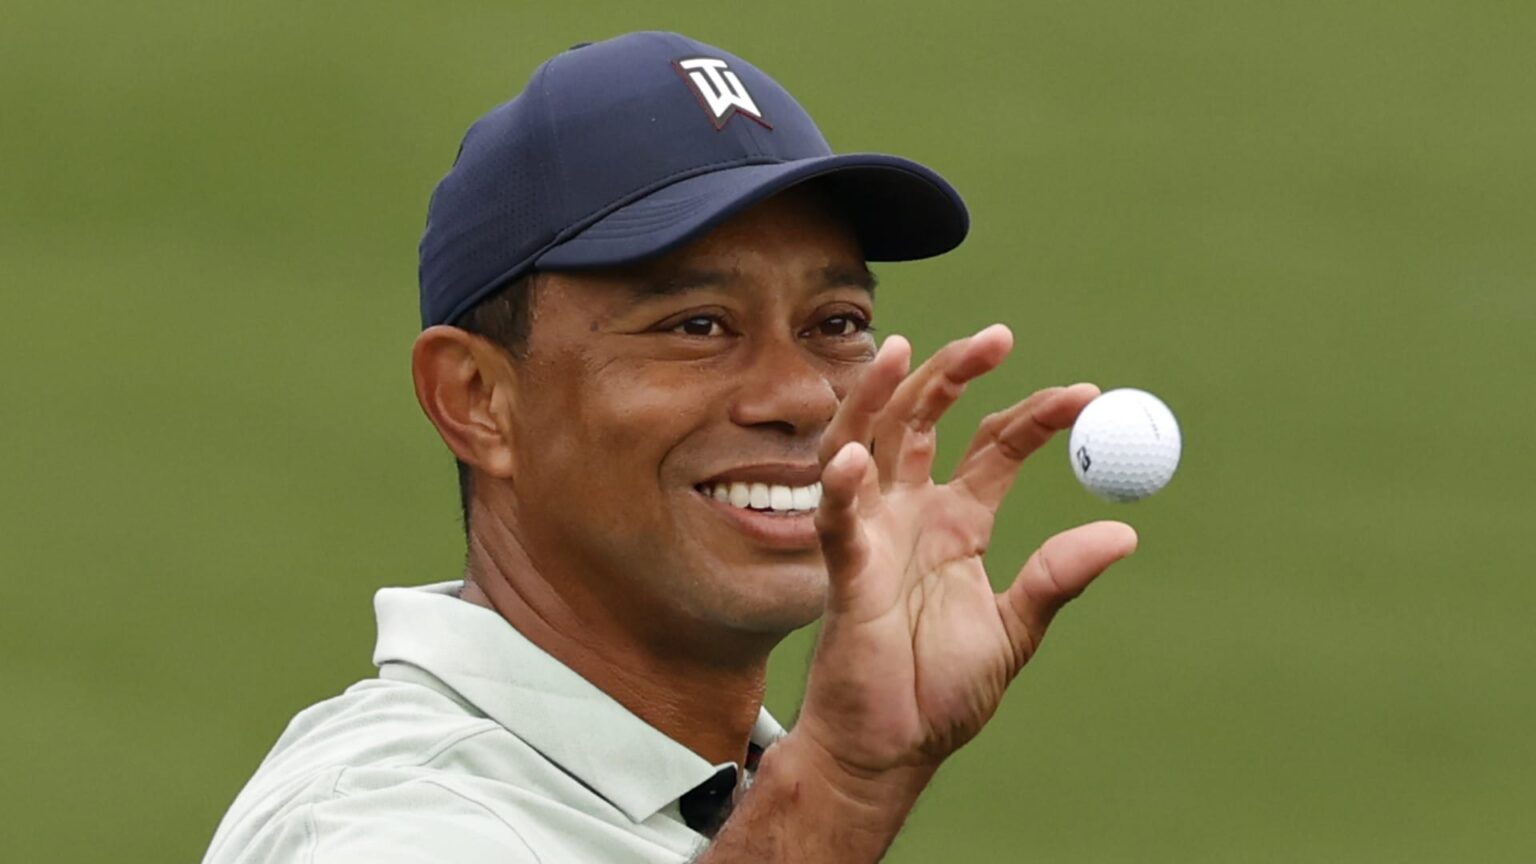 Tiger Woods, TaylorMade sign apparel deal following his Nike split